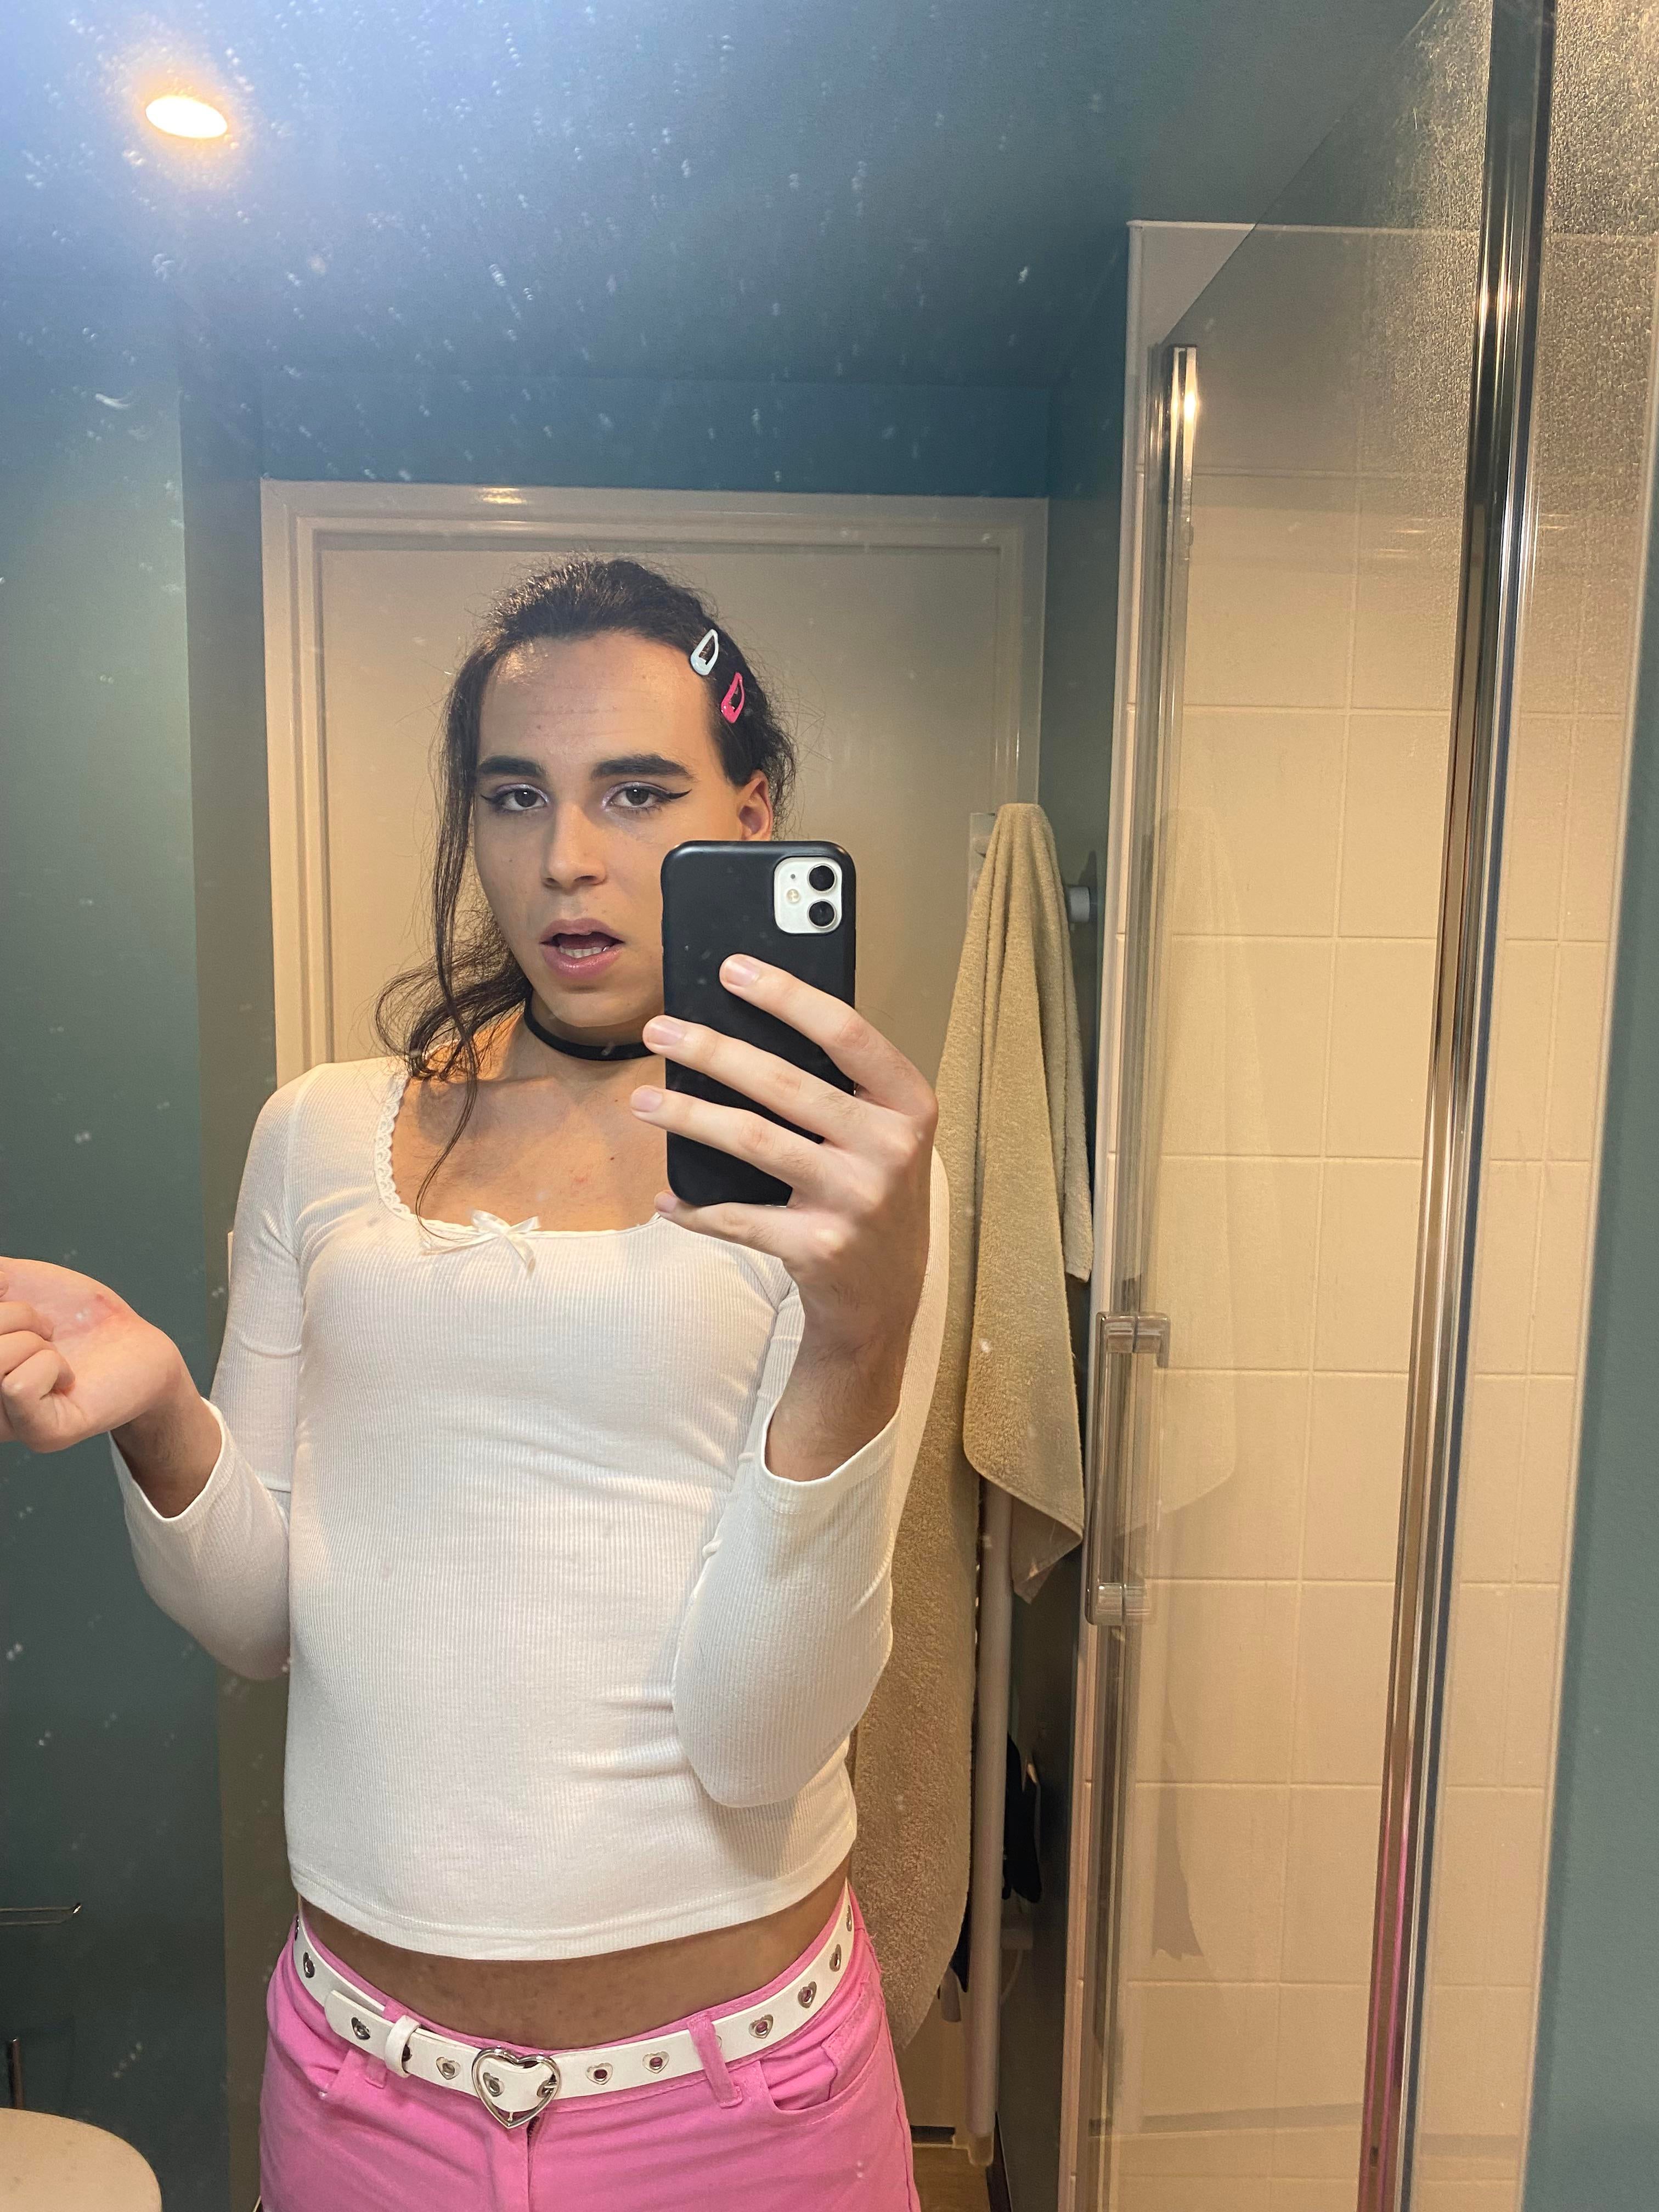 Do you think I’ll make a good daddy’s girl? 🎀 101mcsz - transexual woman